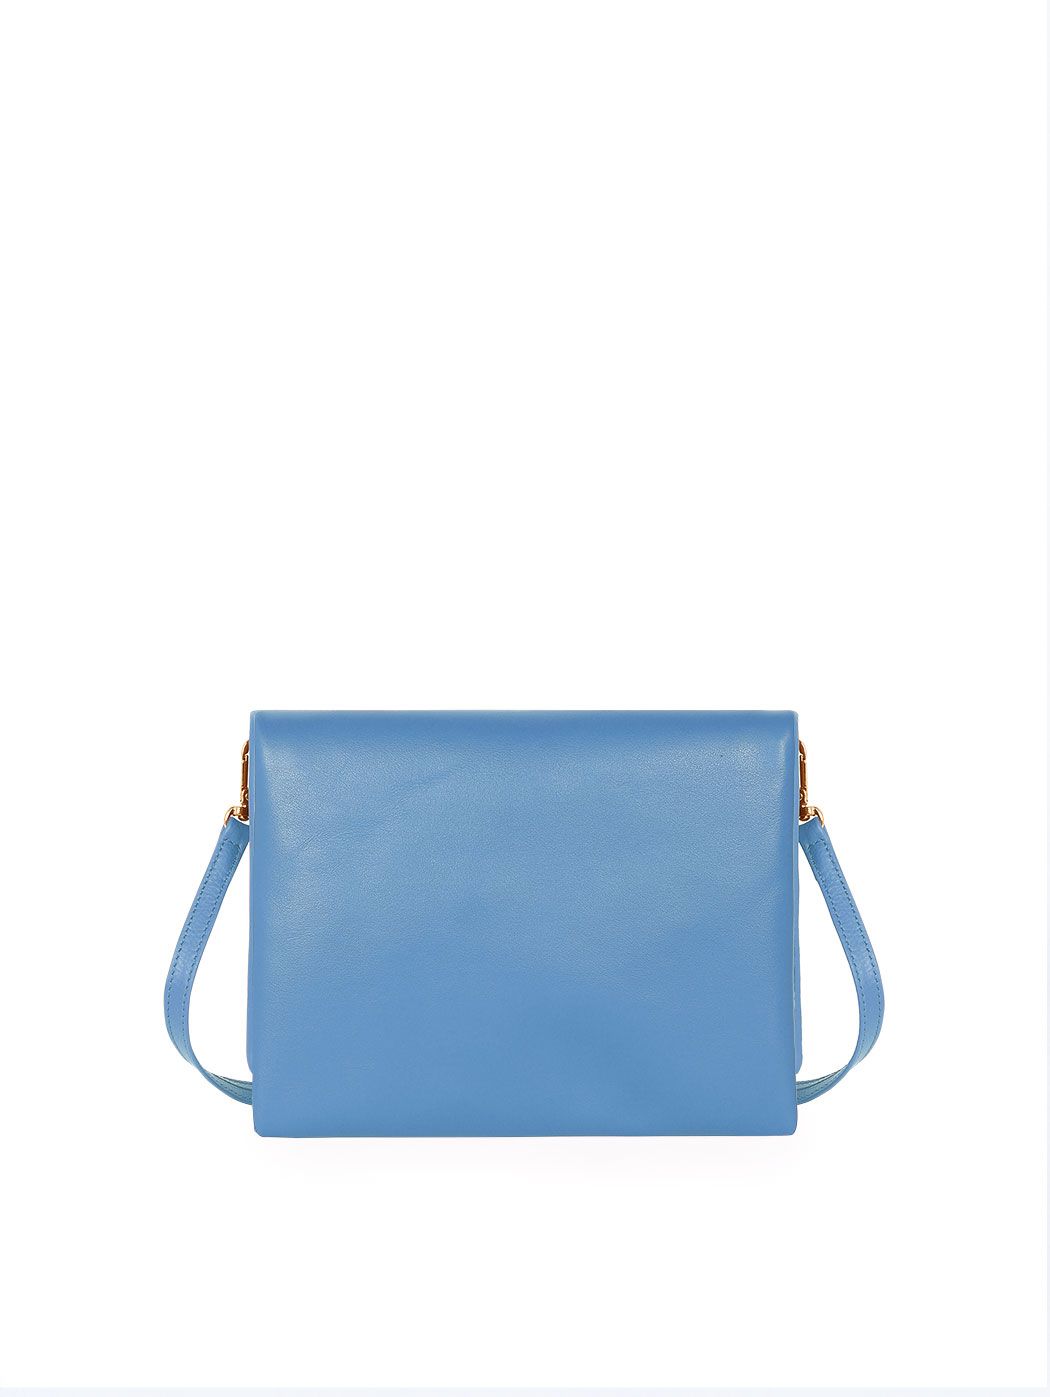 Buy Baby Blue Clutch Online In India - Etsy India